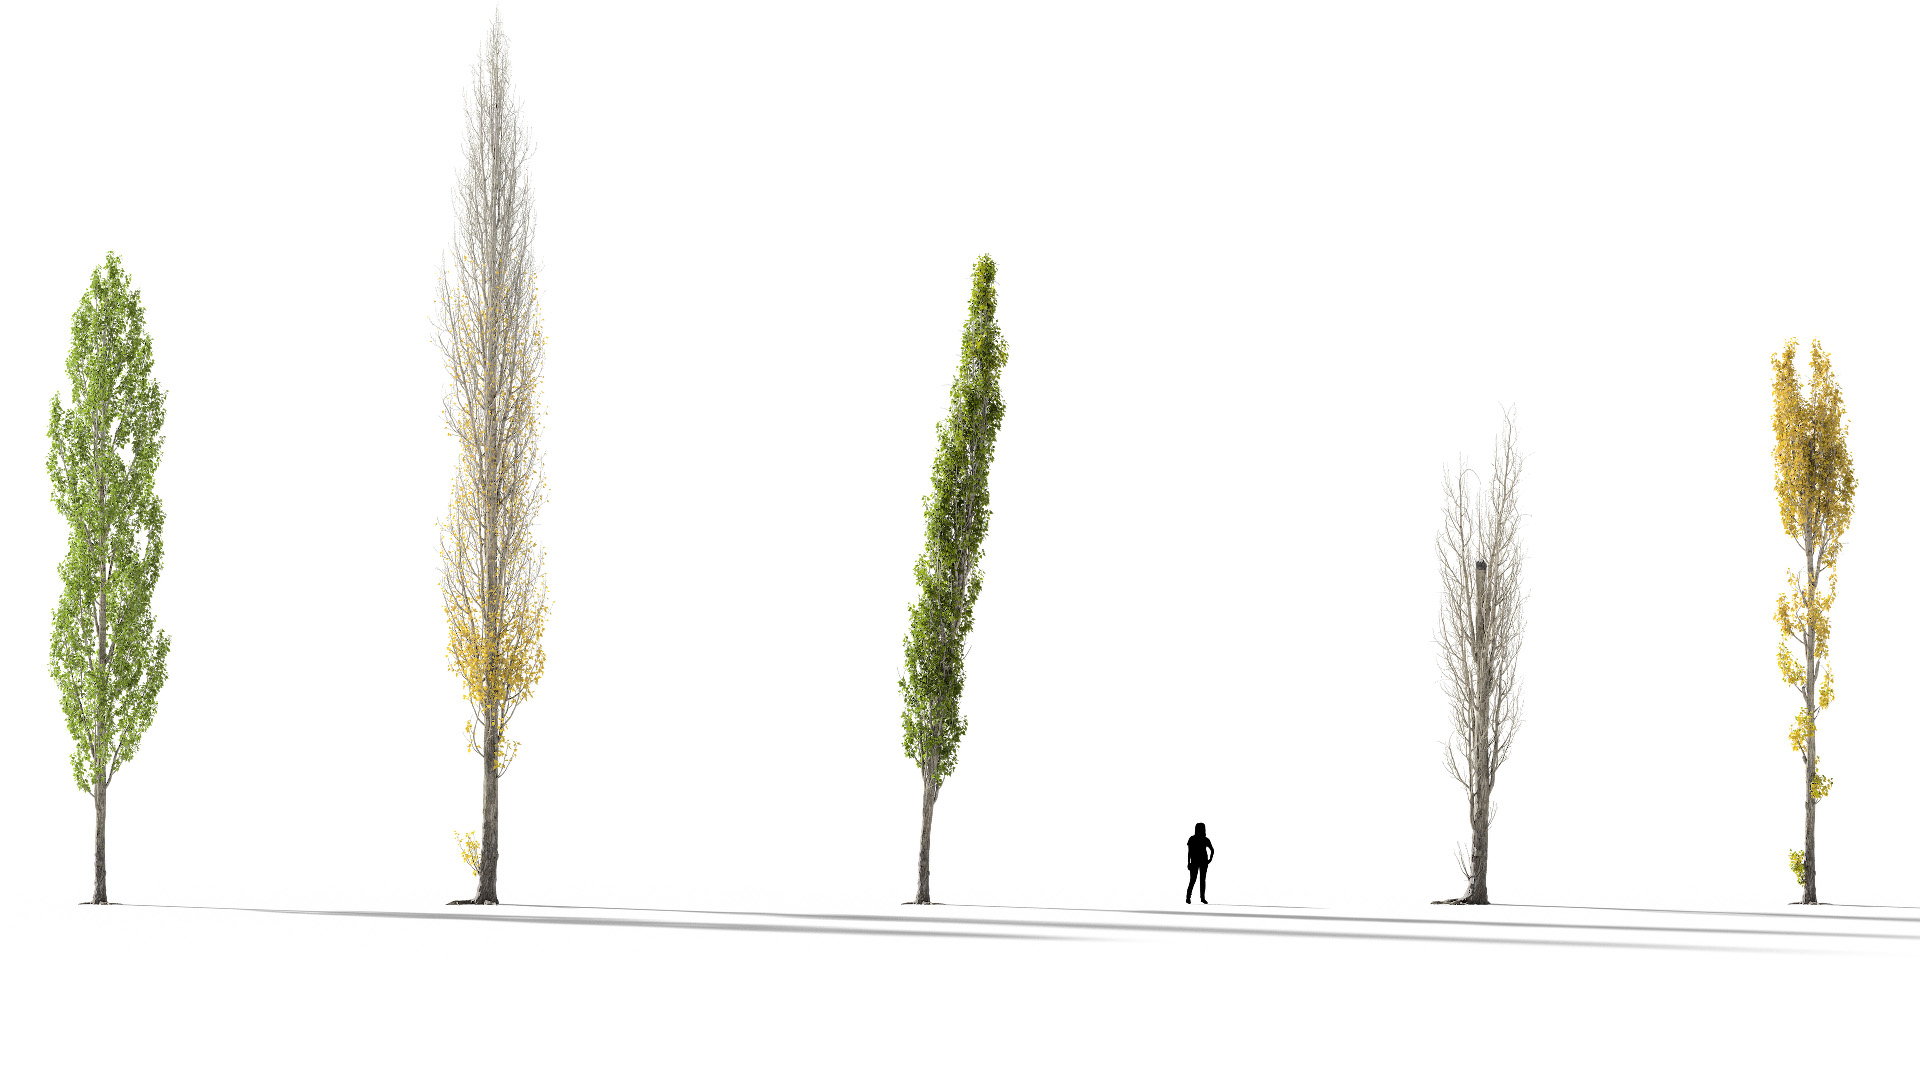 3D model of the Lombardy poplar Populus nigra 'Italica' published parameters